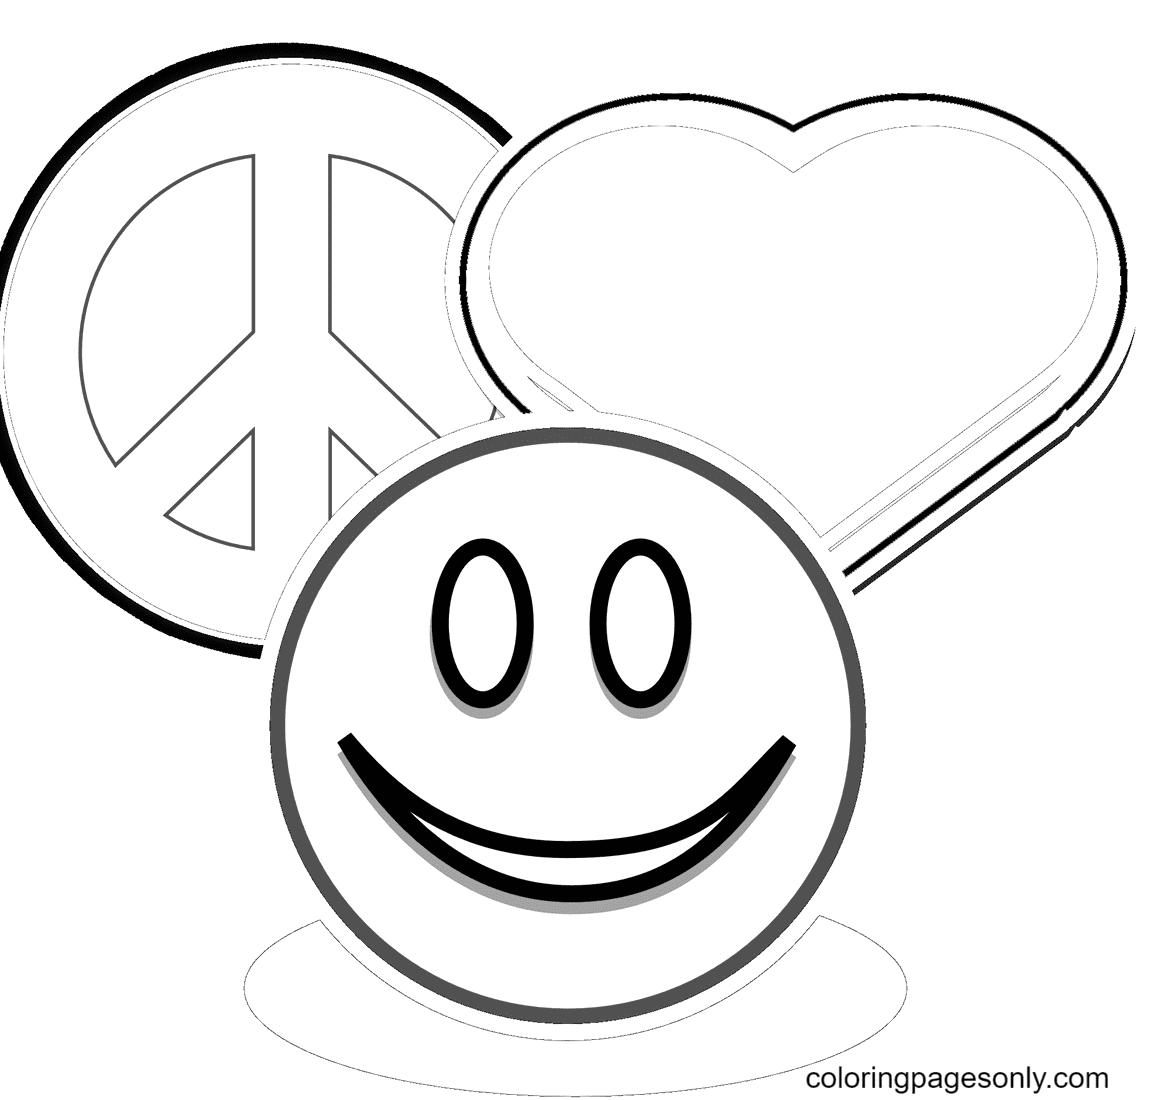 Printable World Peace Coloring Pages